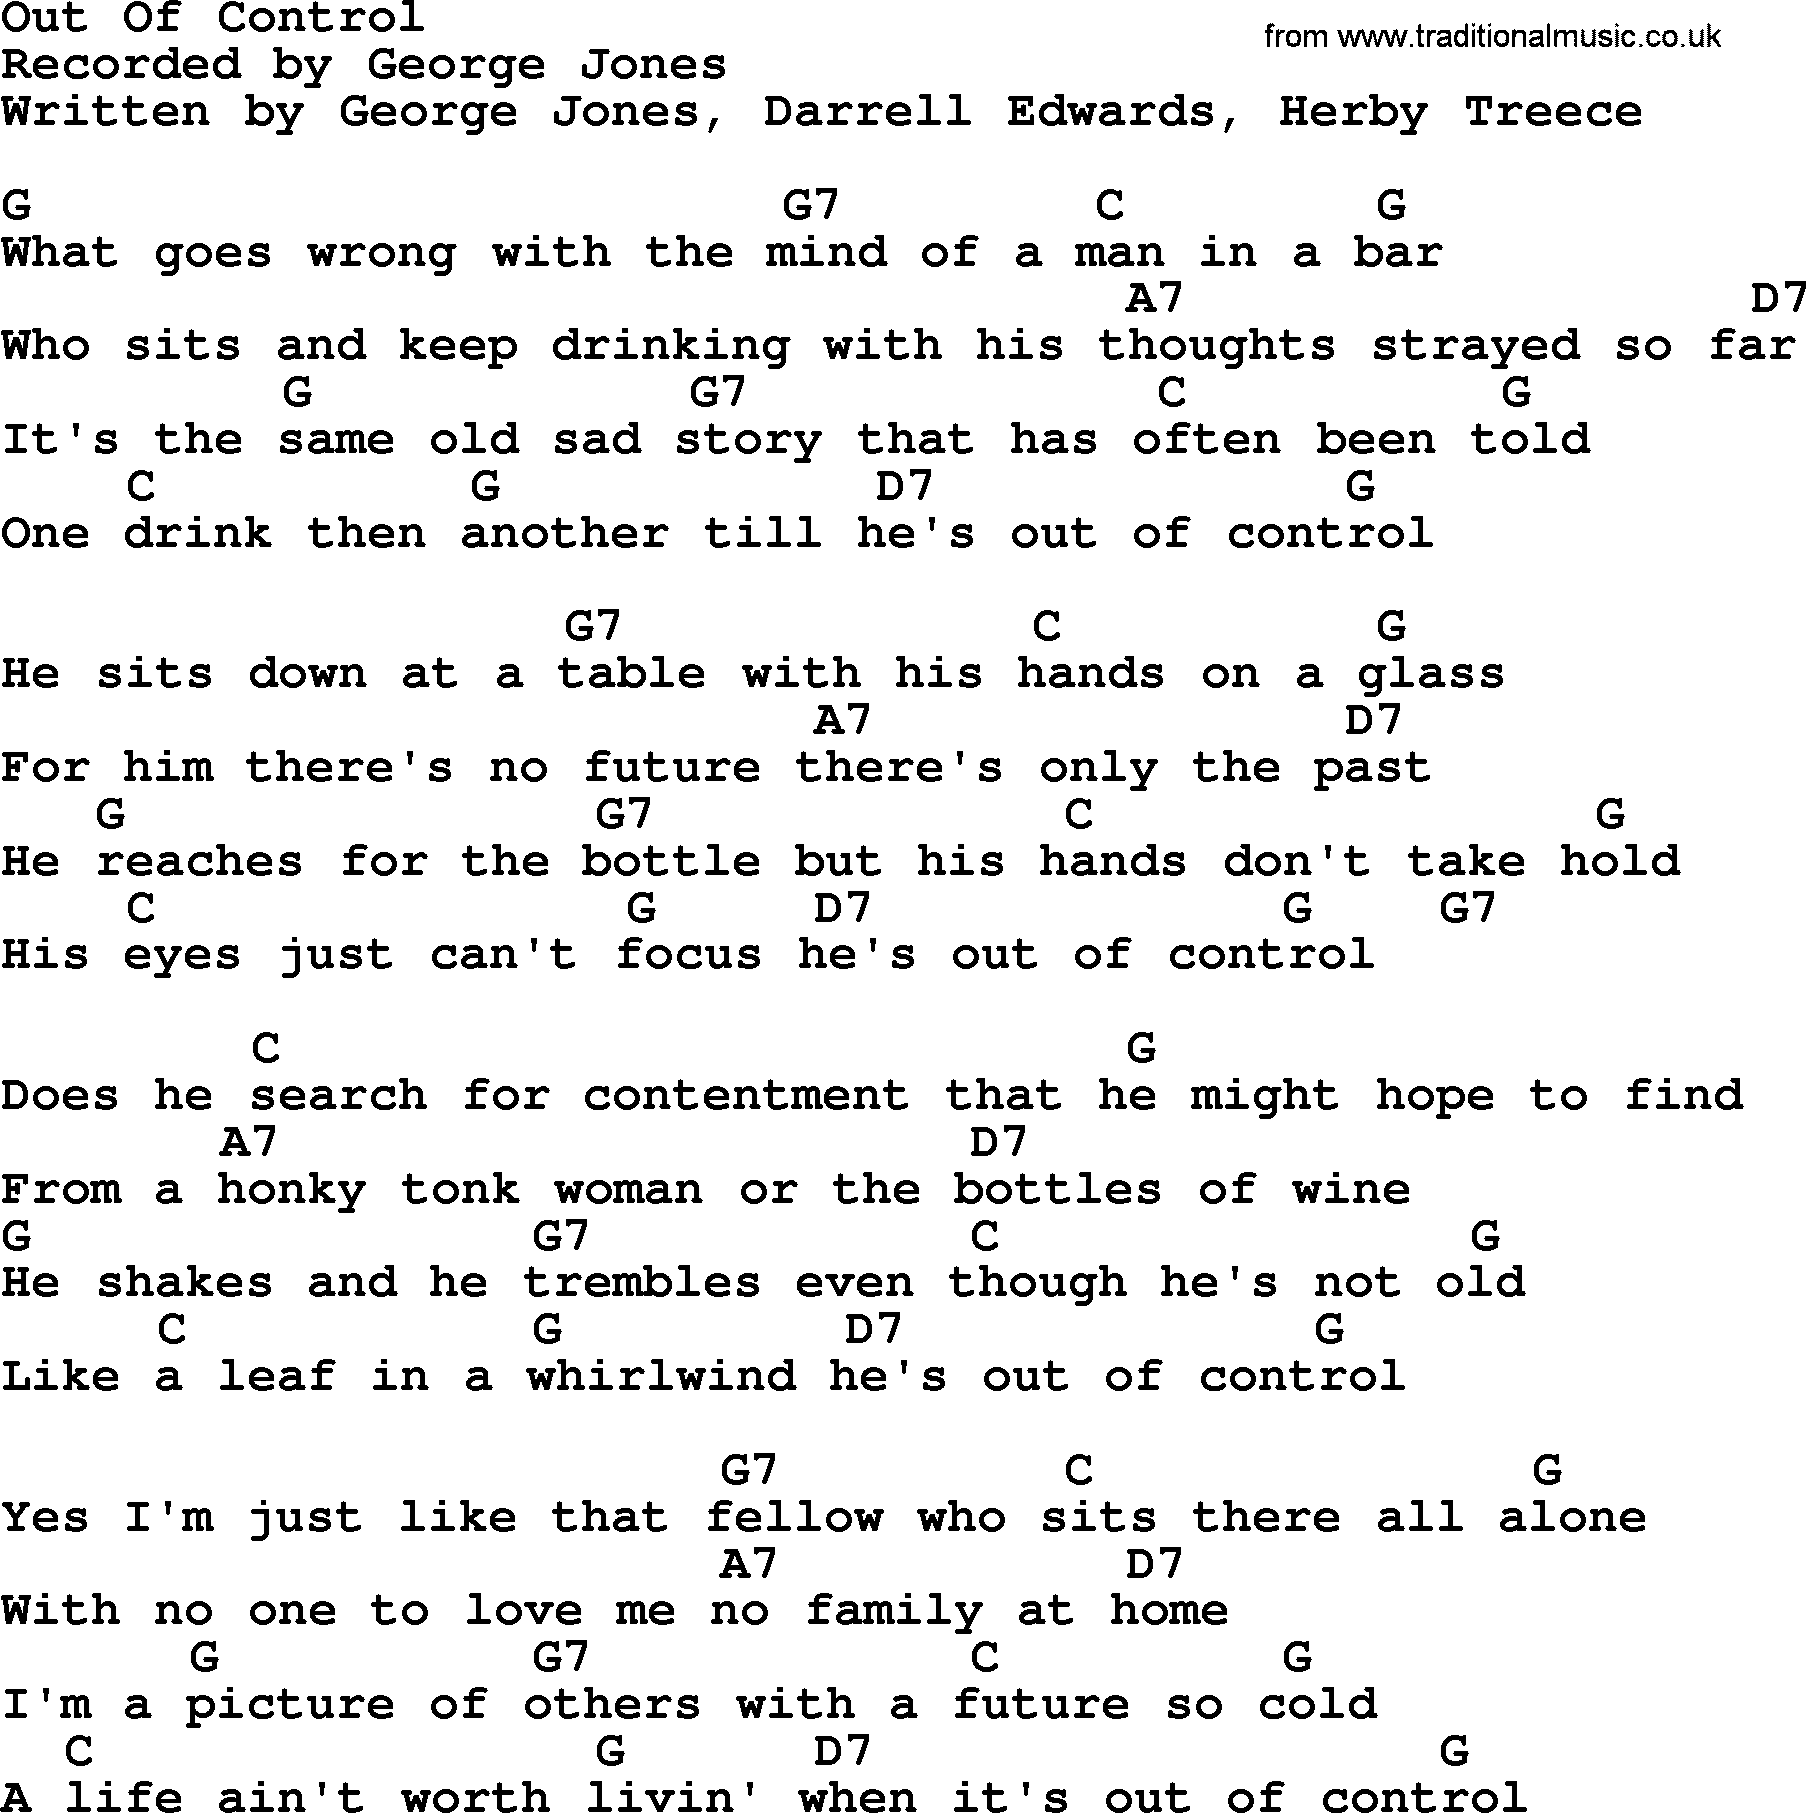 George Jones song: Out Of Control, lyrics and chords